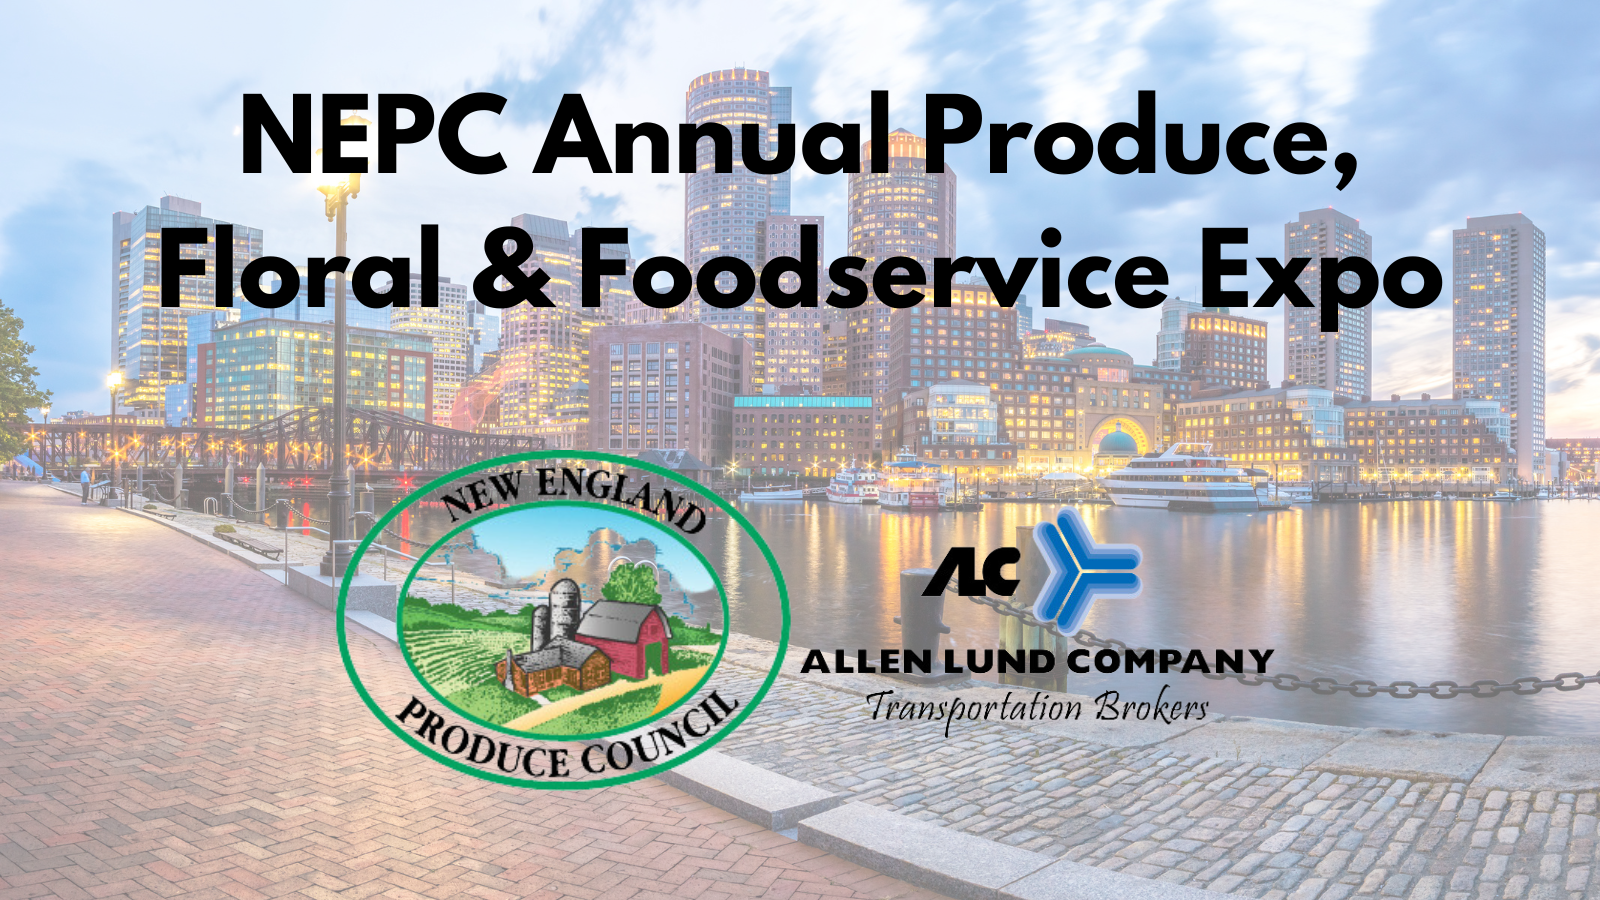 ALC will be attending the NEPC Annual Produce, Floral & Foodservice Expo